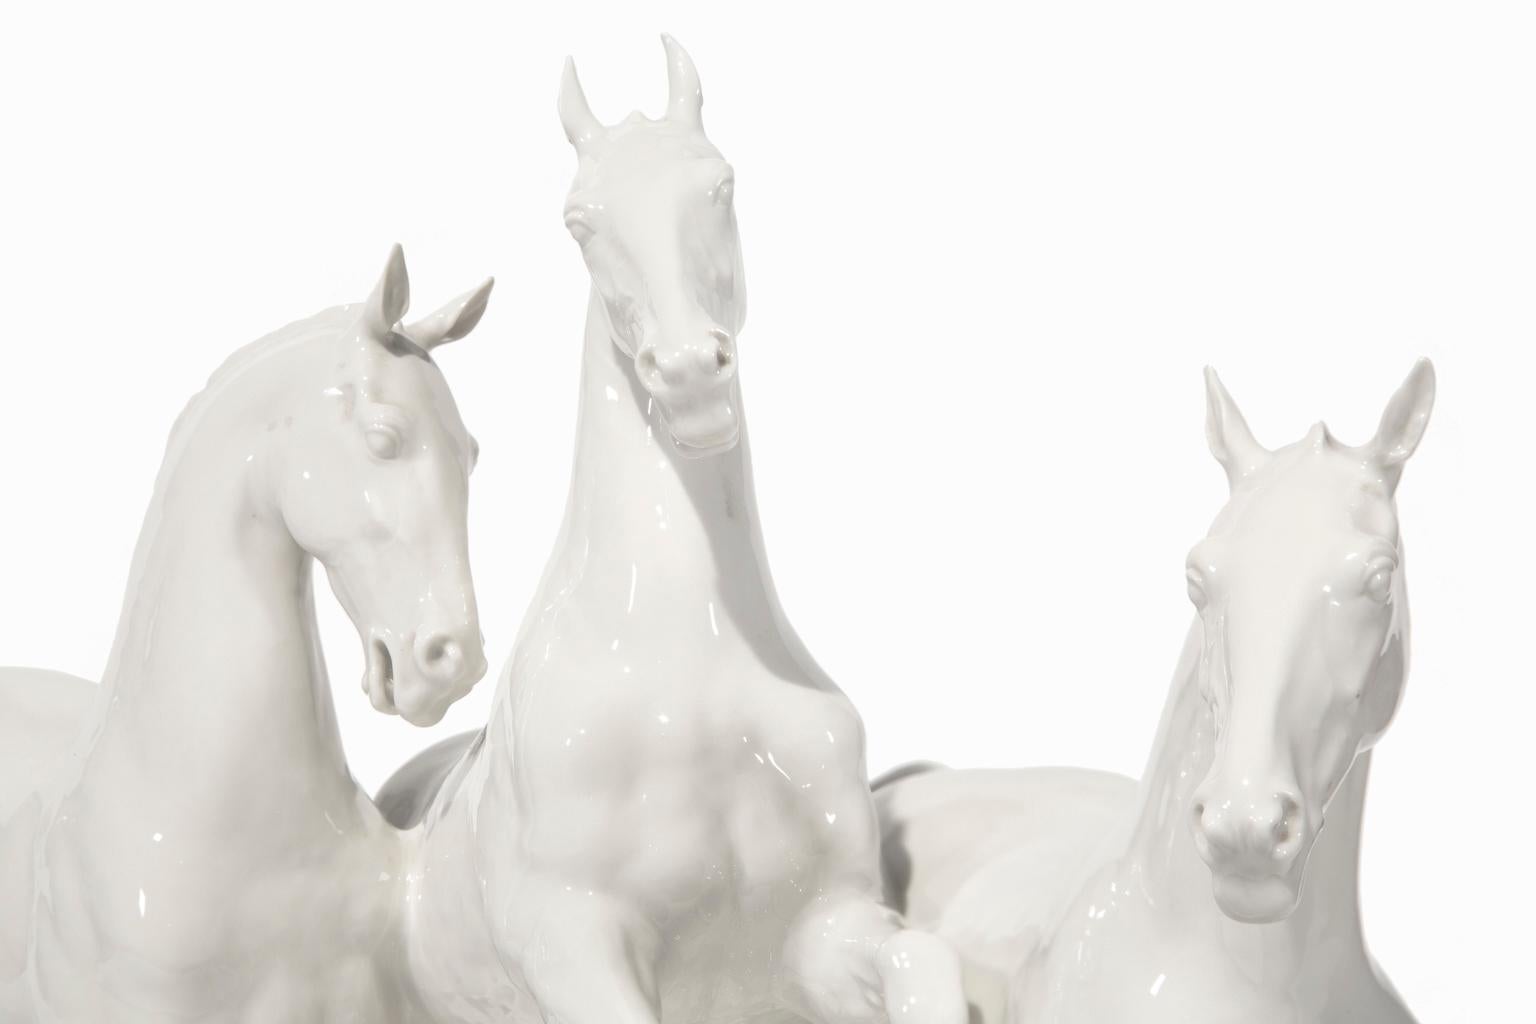 This gorgeous porcelain sculpture from Hutschenreuther porcelain is of three galloping horses, sculpted in exquisite detail by the sculptor, Hans Achtziger. Hans Achtziger was a designer and porcelain modeller who trained  from 1937-1939 at the